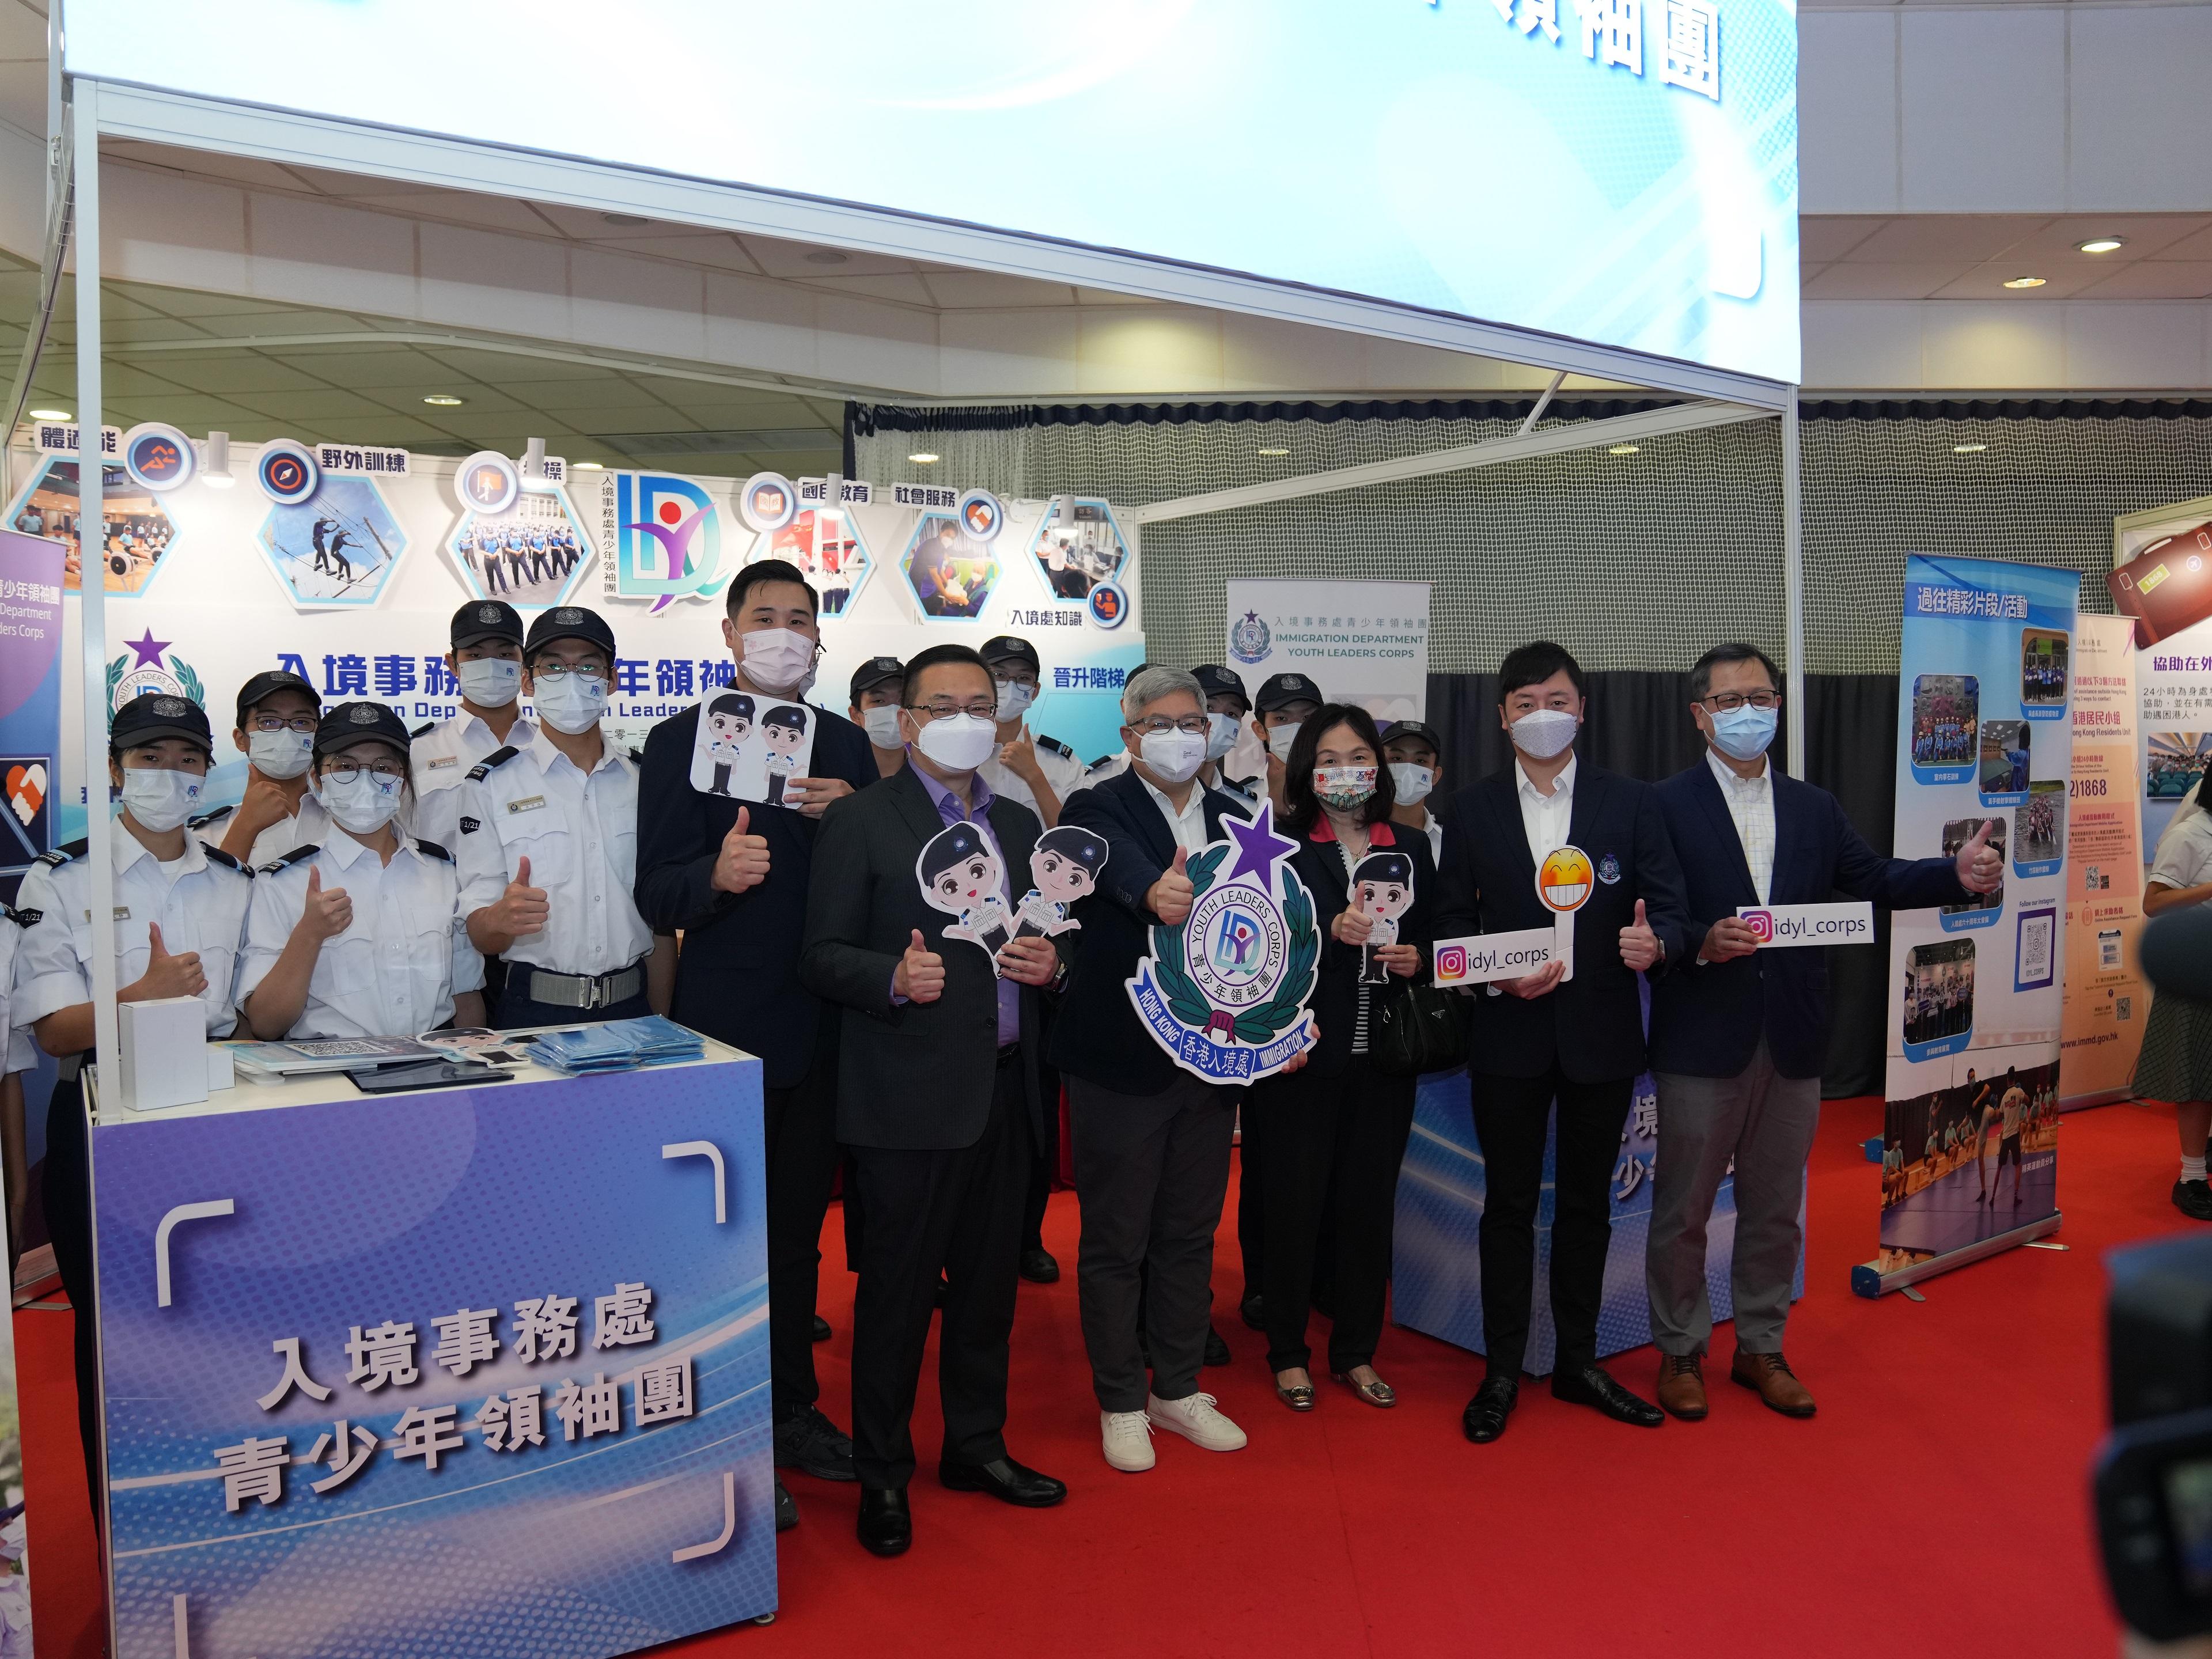 The Immigration Service Institute of Training and Development held an Open Day today (October 29). Photo shows the Director of Immigration, Mr Au Ka-wang (fourth right), touring the Immigration Department Youth Leaders Corps exhibition booth.